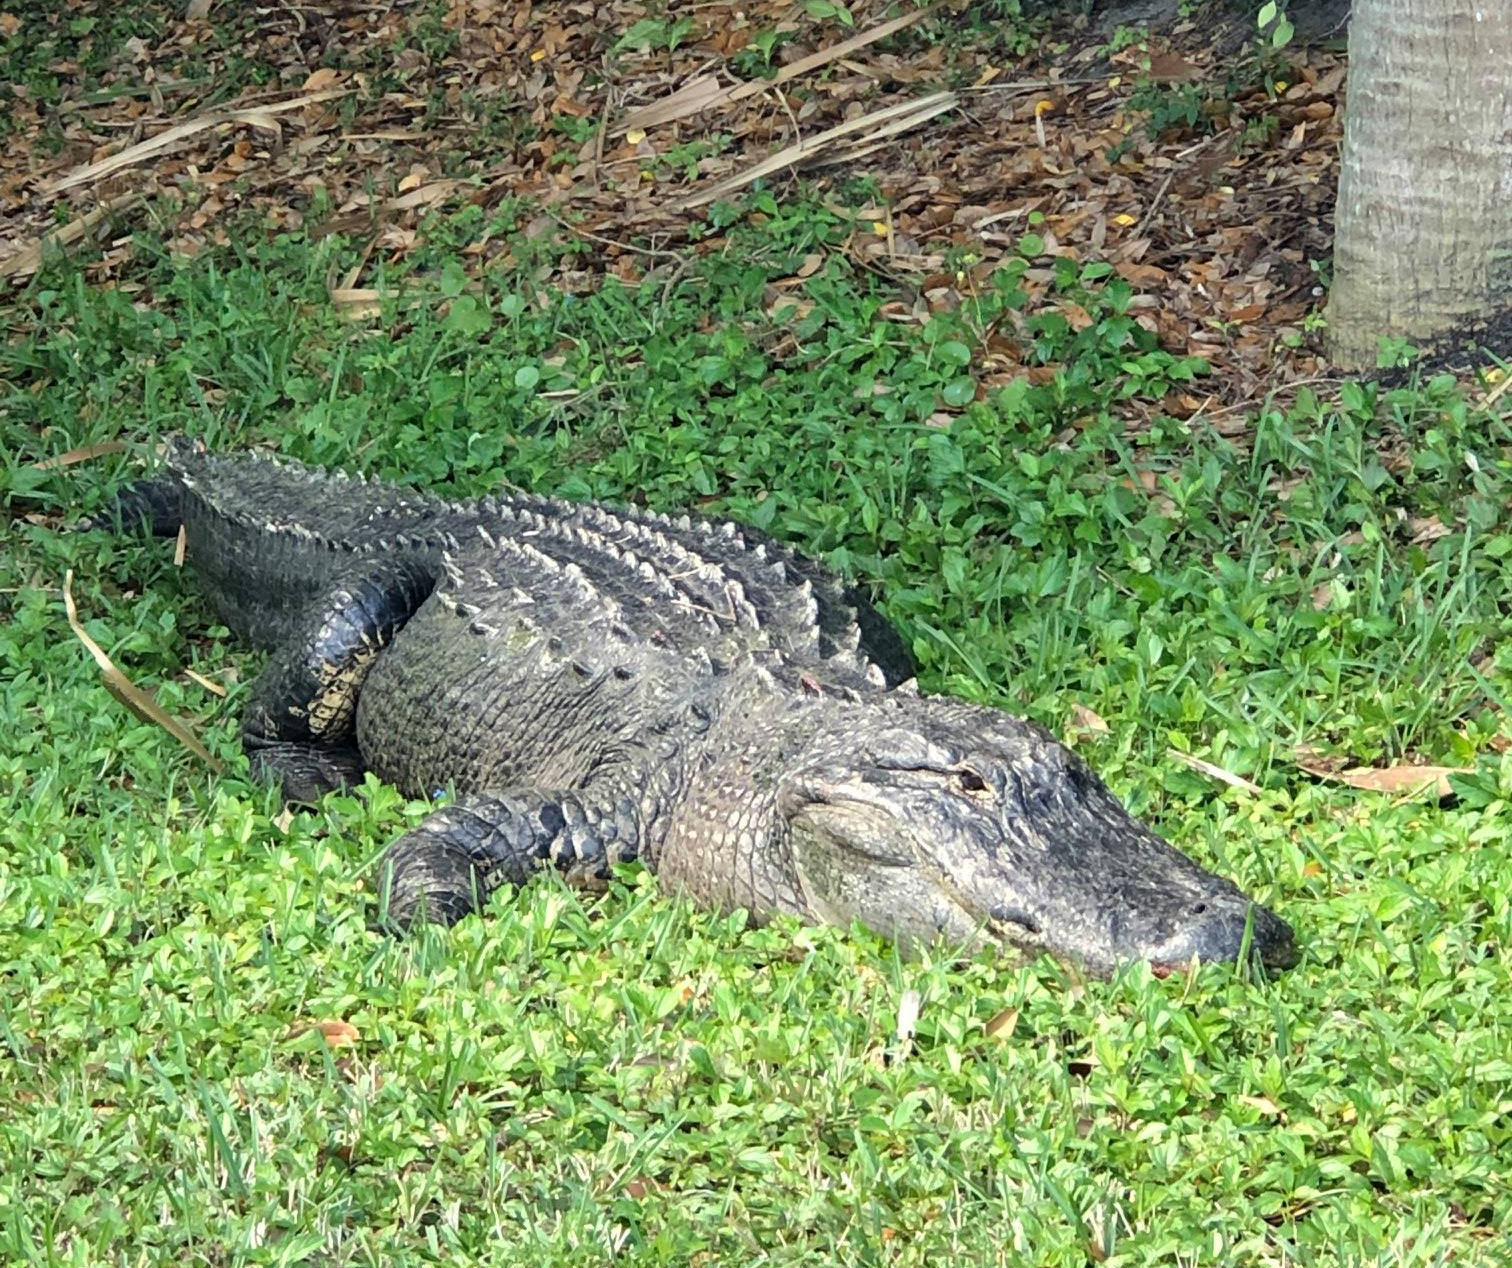 Gator was almost 12 feet long and weighed about 750 pounds. (Credit: Jupiter Police Department)